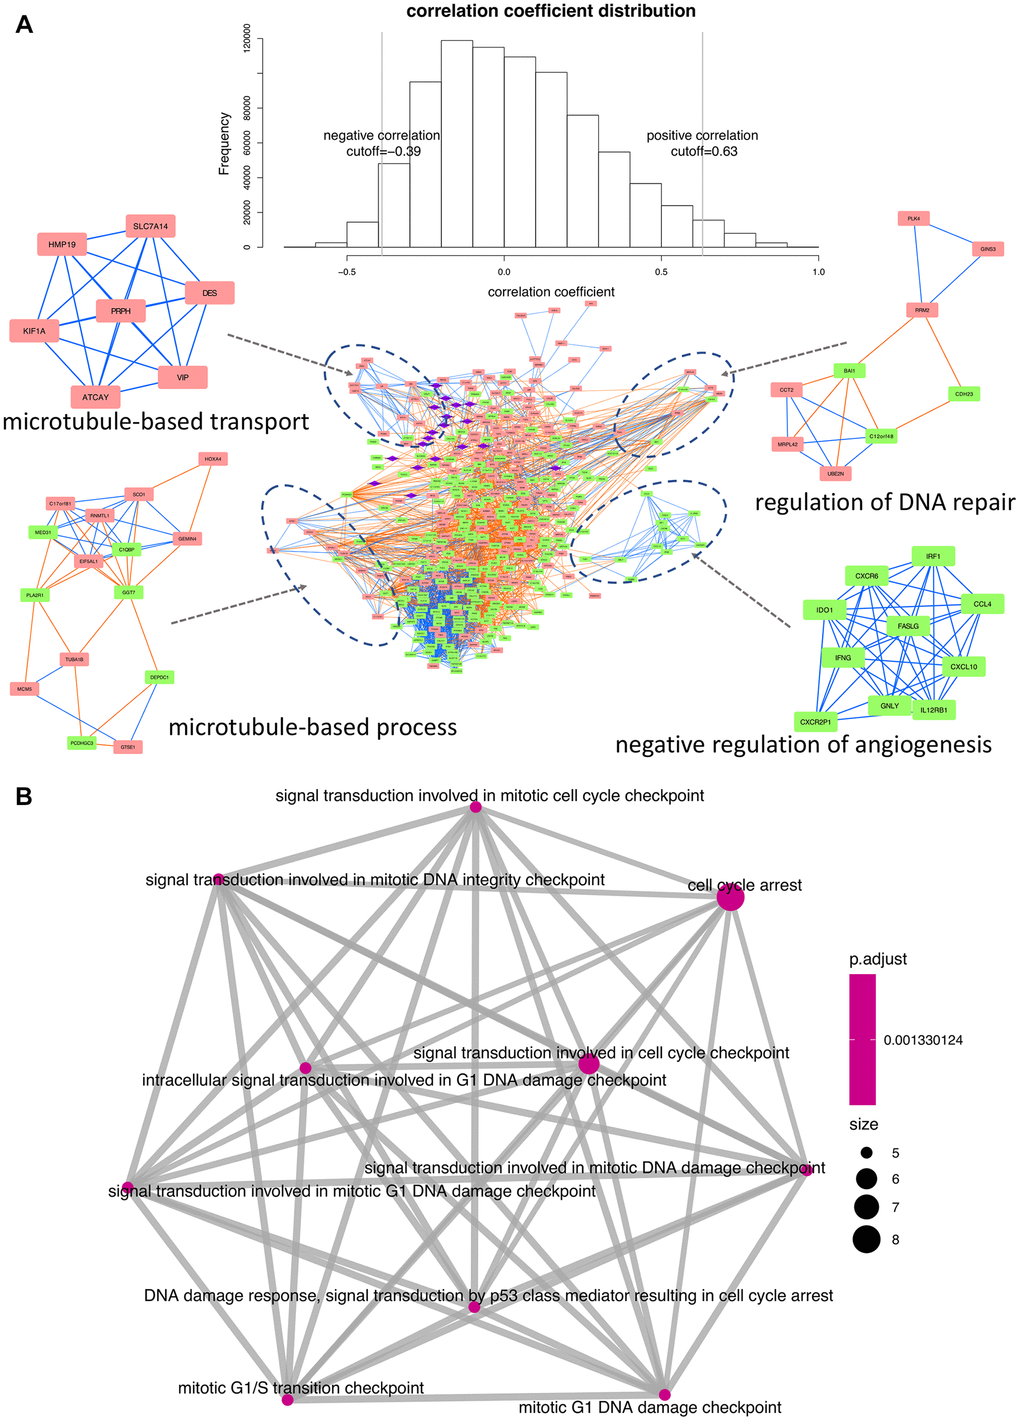 Interaction network and functional enrichment analysis of DEGs and miRNAs between early and late stage. (A) Co-expression network analysis. Purple diamonds represent miRNAs; red and green rectangles represent upregulated and downregulated DEGs, respectively. Orange and blue lines indicate, respectively, positive and negative correlations between nodes. Top-enriched functions are indicated under the corresponding modules. (B) Functional network depicting DEG-enriched processes regulated by the 19 differentially expressed miRNAs.